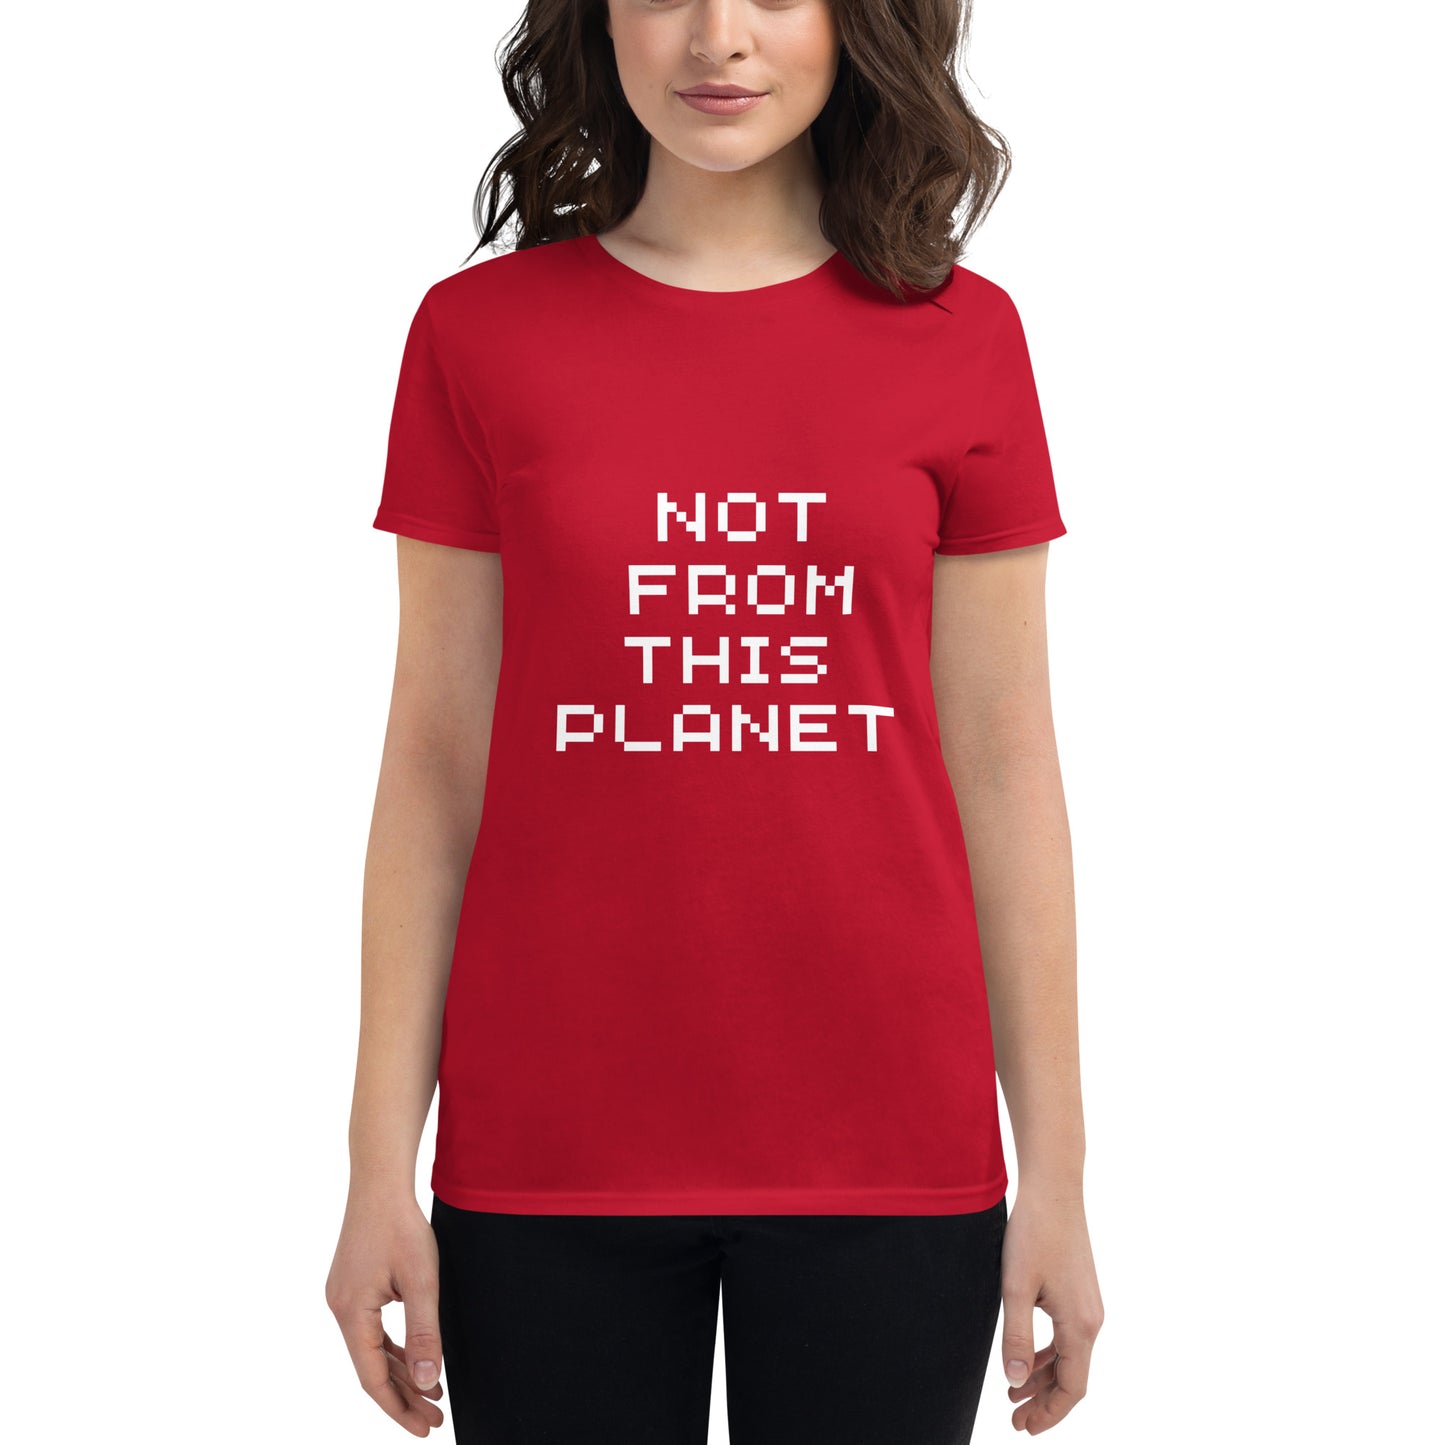 Women's NOT FROM THIS PLANET t-shirt